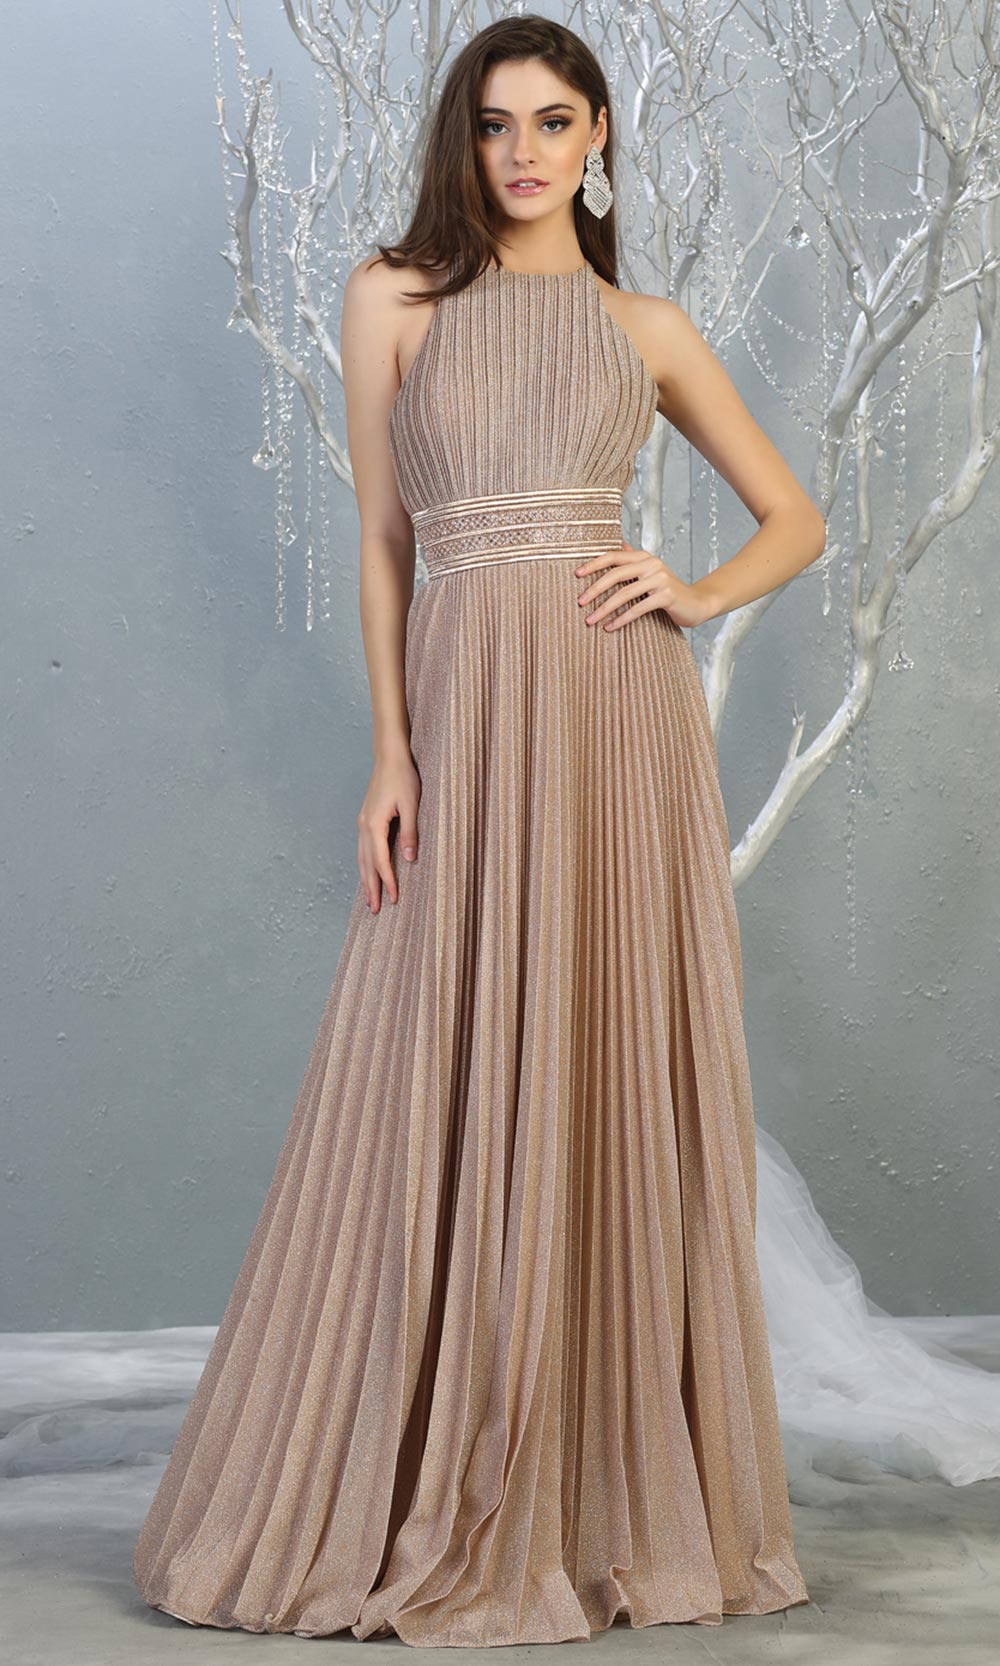 Mayqueen RQ7856 long rose gold metallic high neck evening gown w/open back. Full length flowy gown is perfect for  enagagement/e-shoot dress, formal wedding guest, evening party dress, prom, engagement, wedding reception. Plus sizes avail.jpg